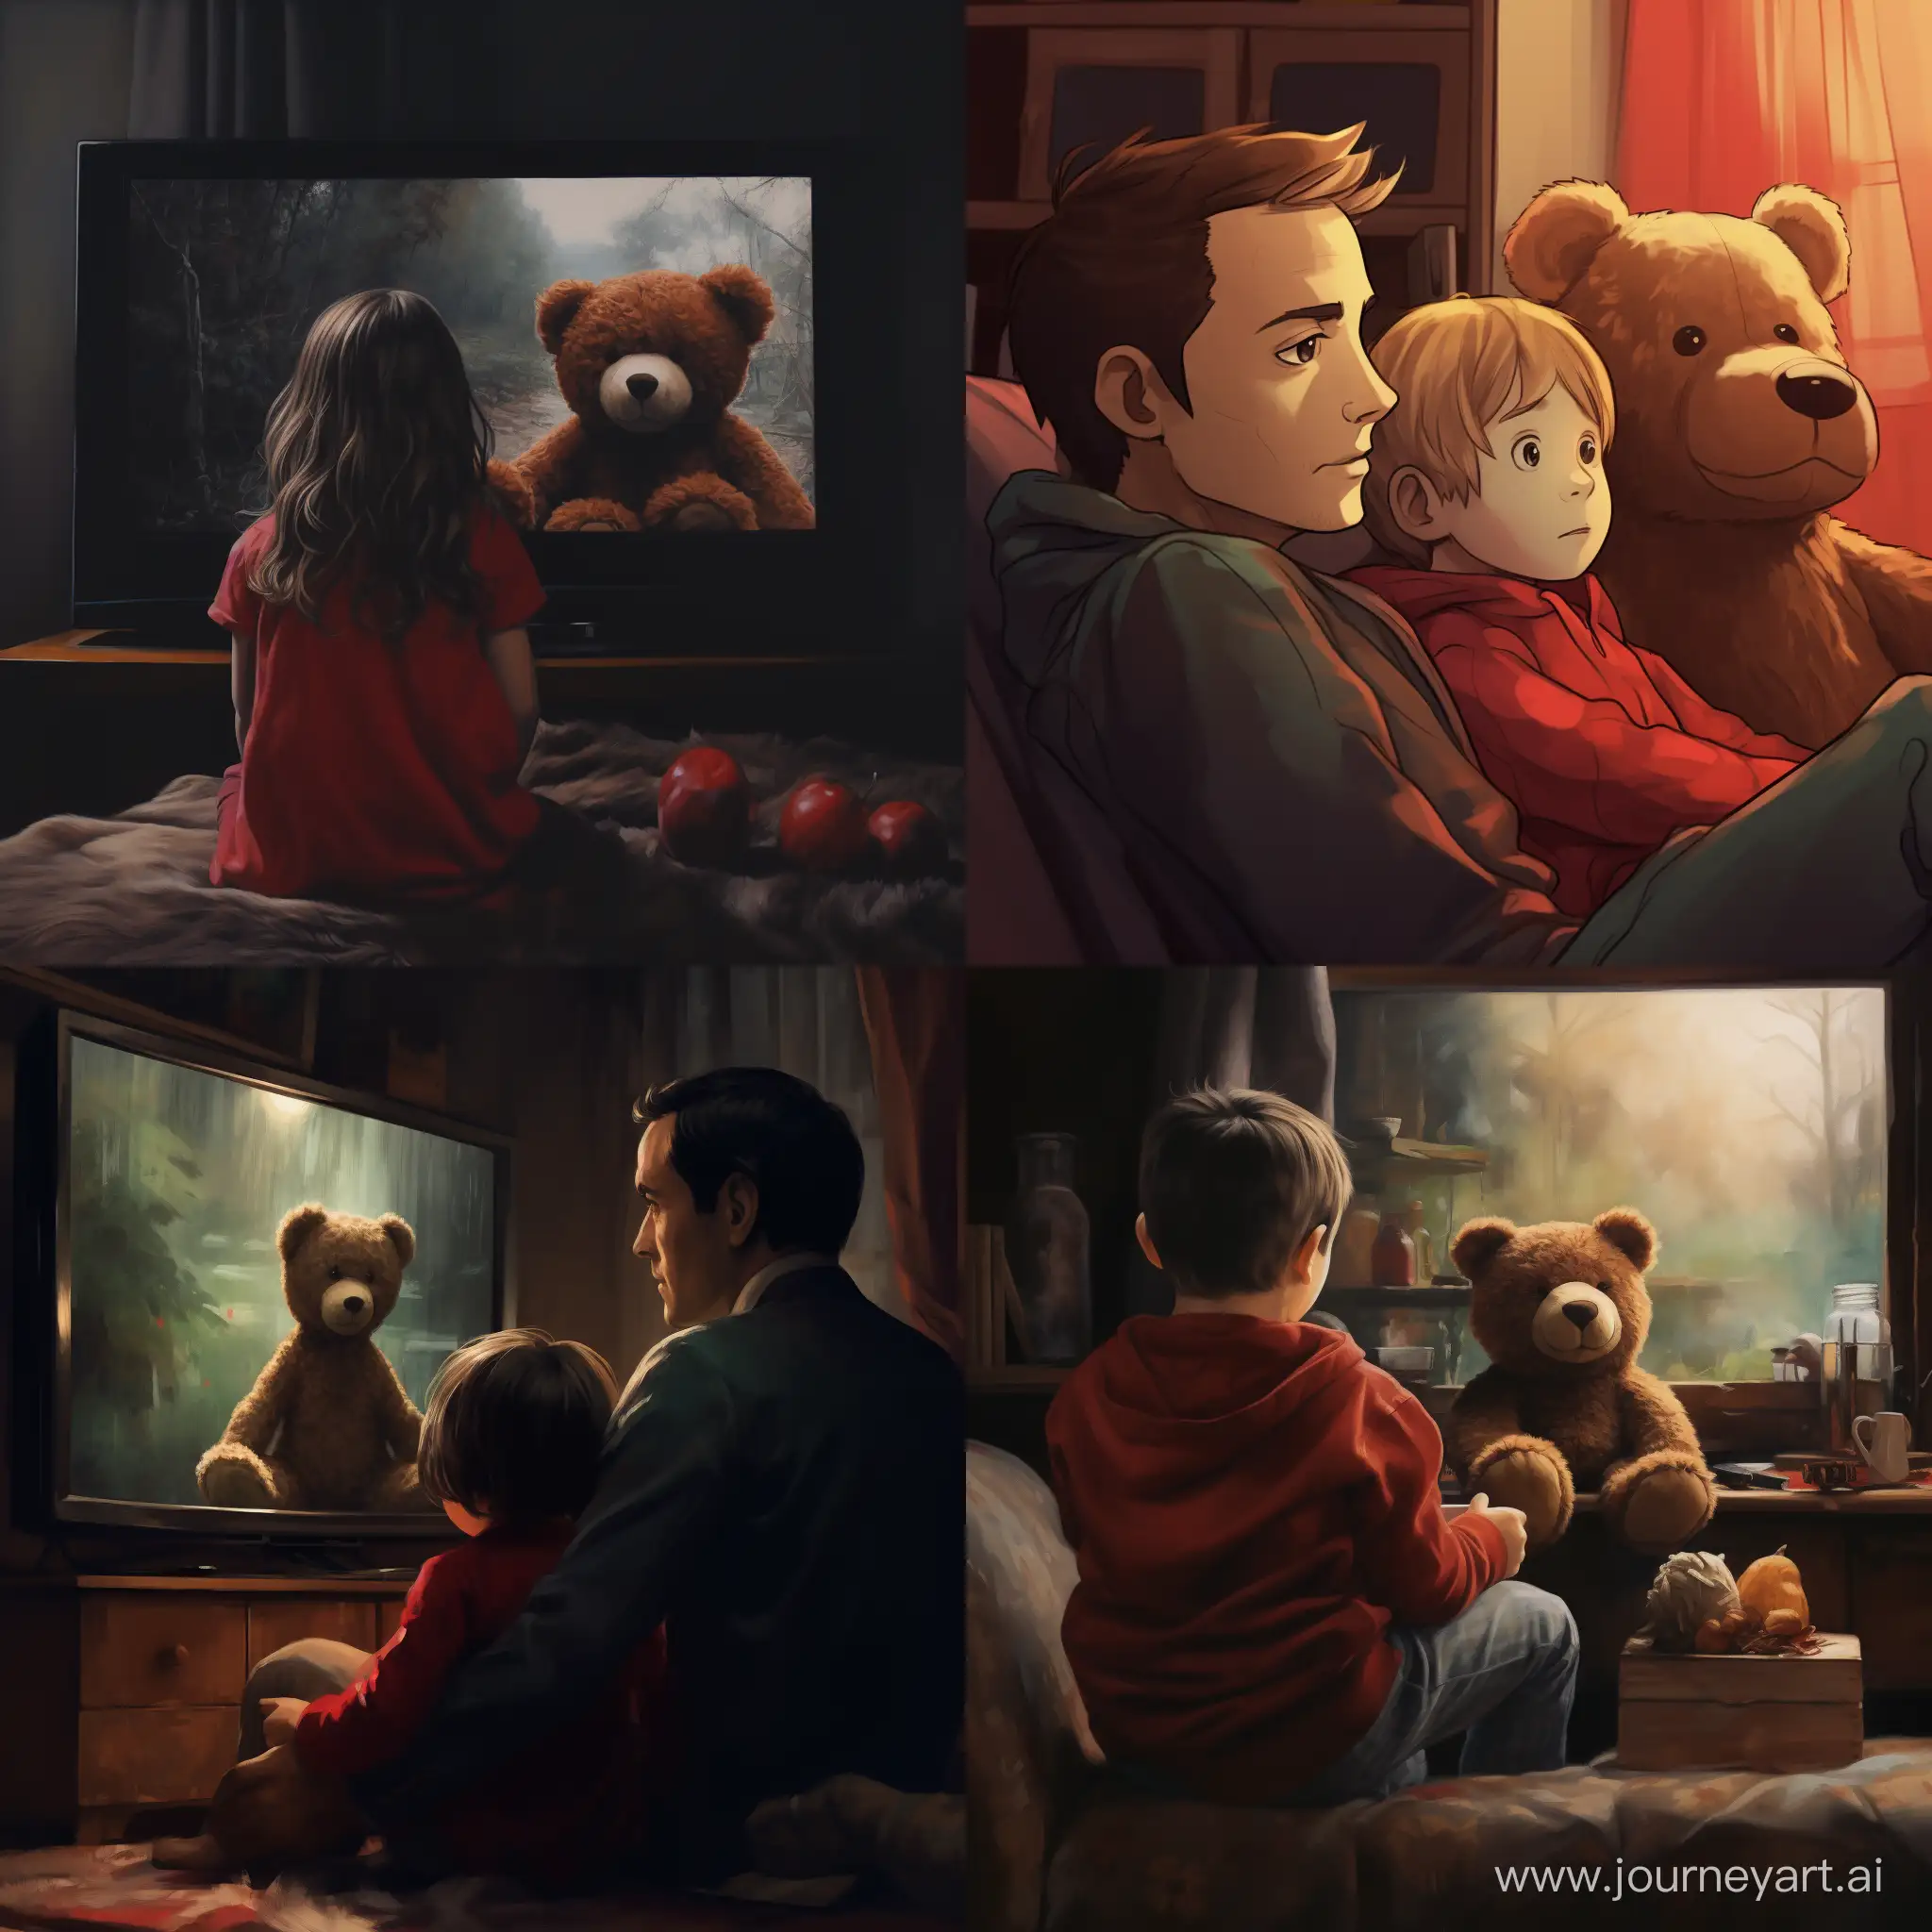 Cozy-Family-Time-Watching-TV-with-Child-and-Teddy-Bear